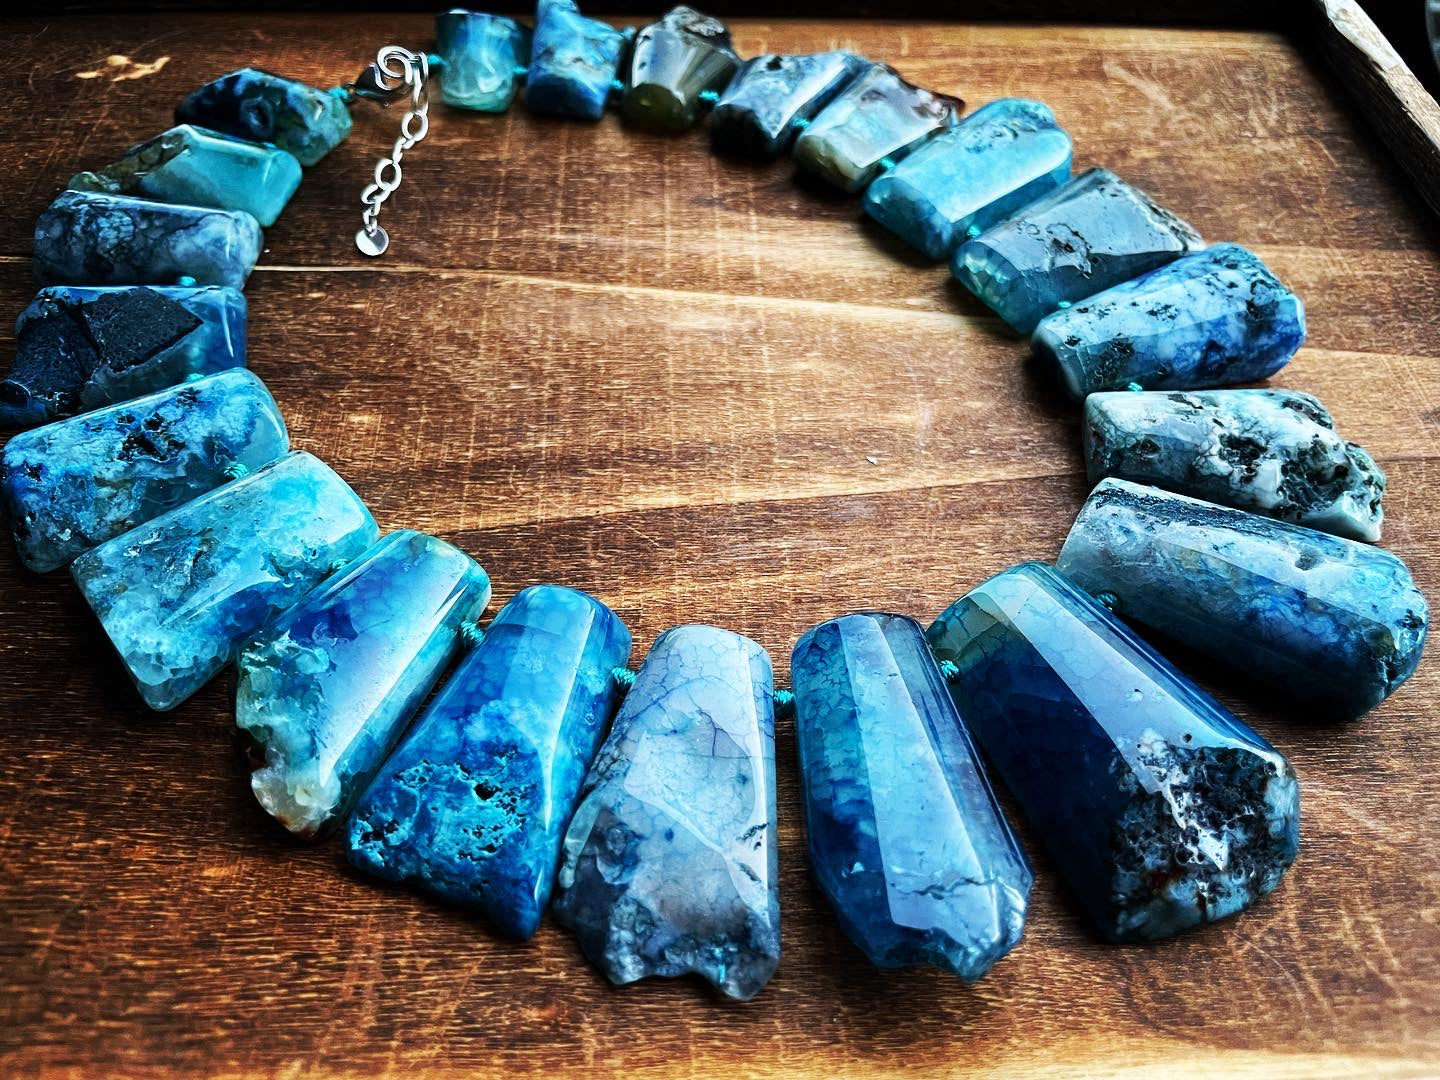 Blue Agate Statement Necklace